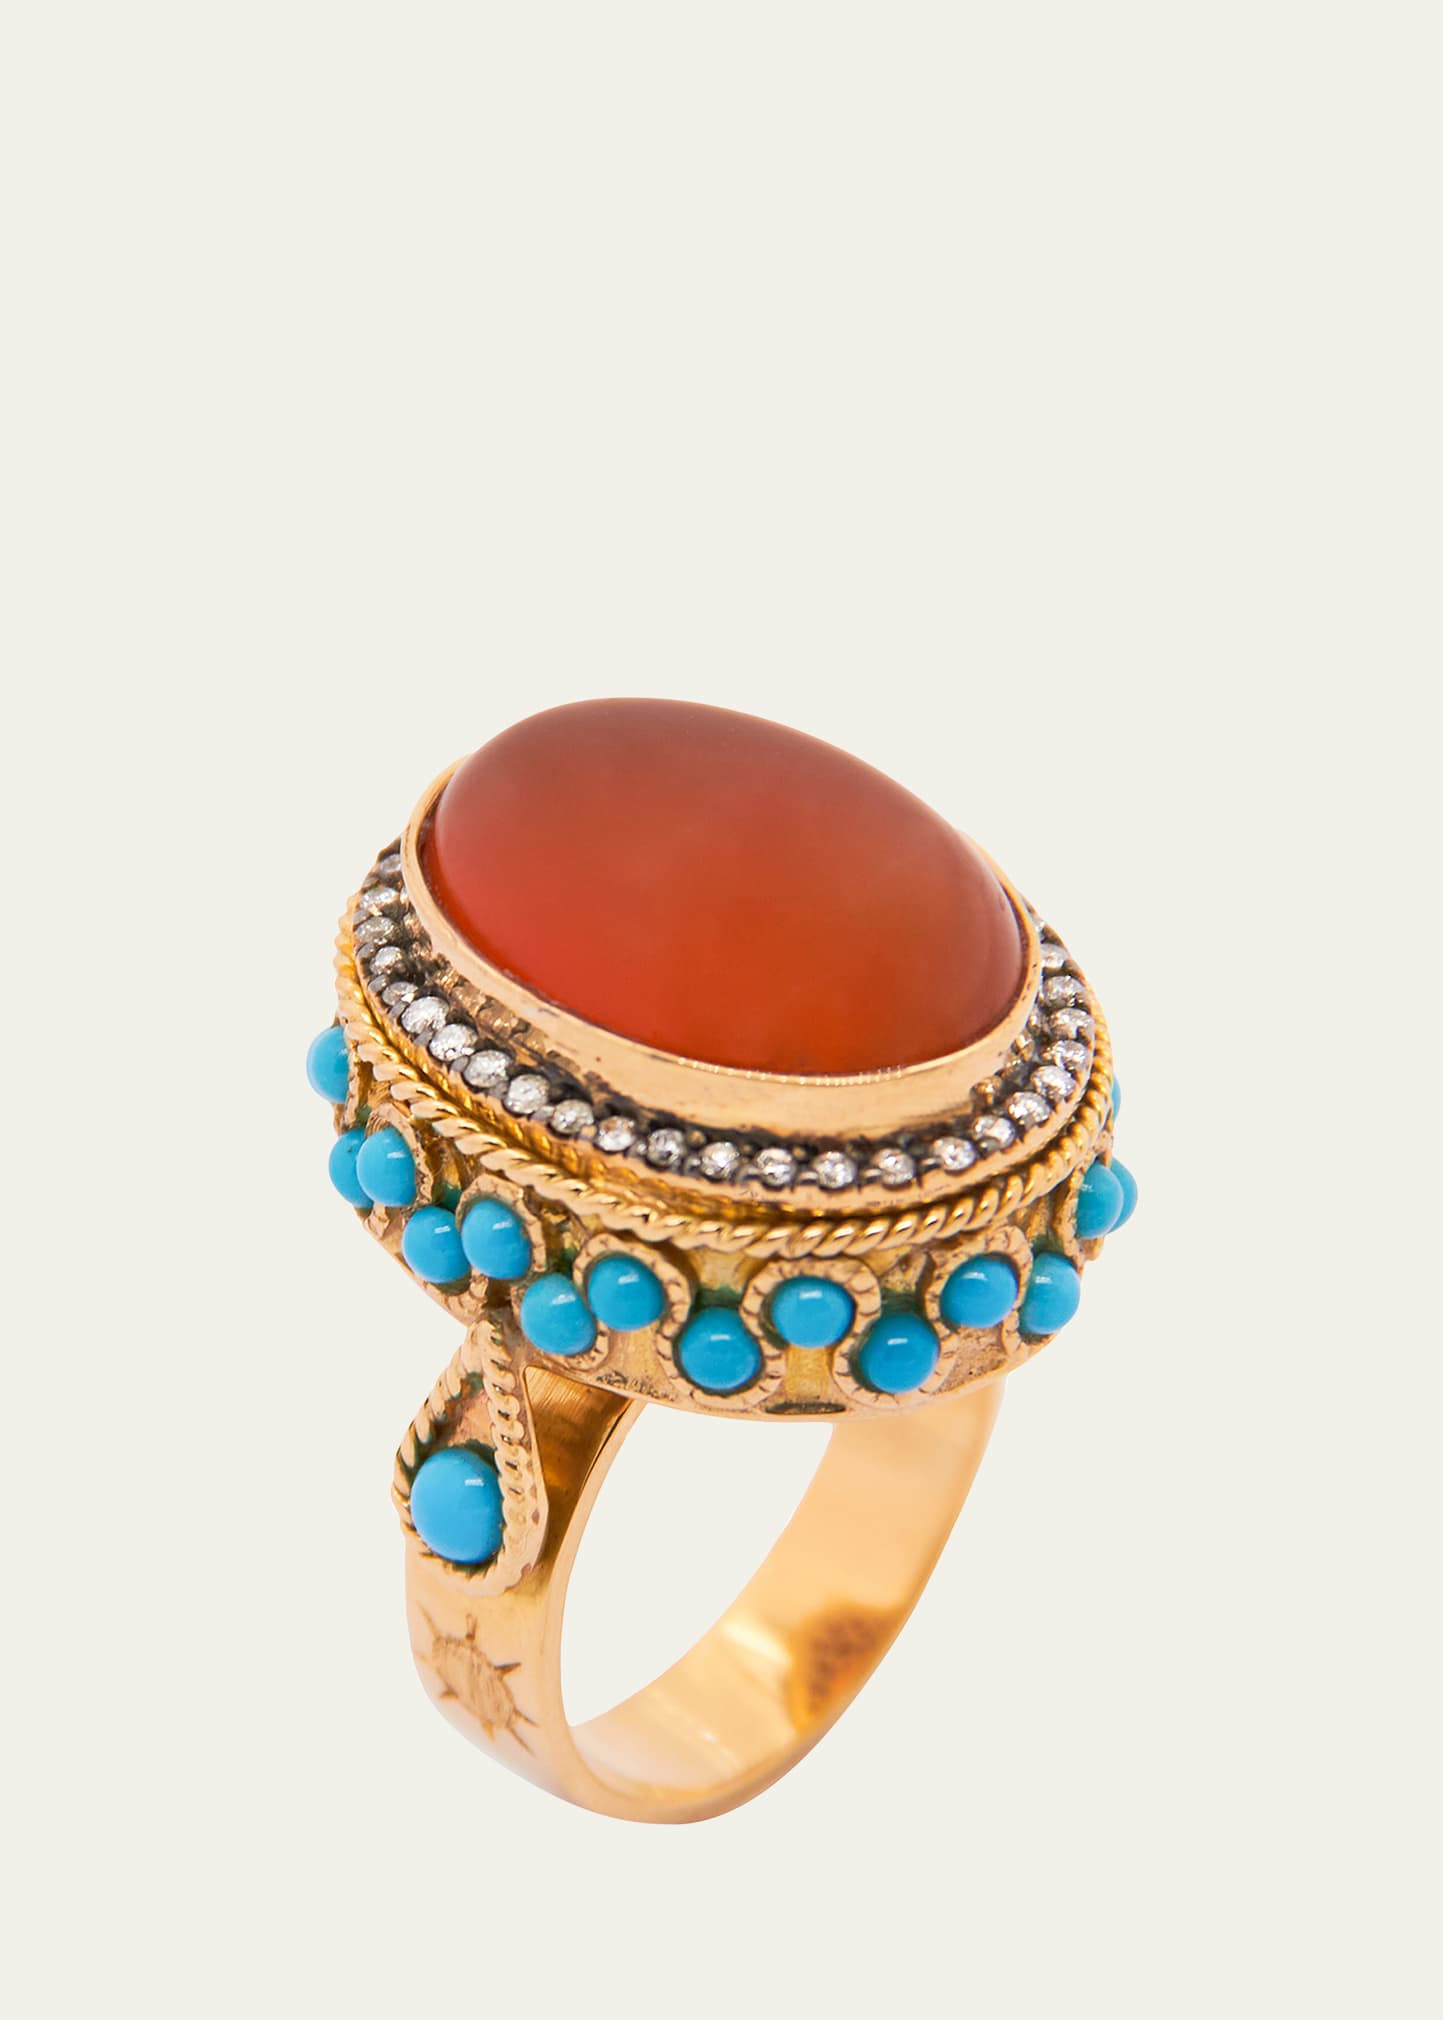 Silk Road Ring with Diamonds, Carnelian and Turquoise, Size 6.75